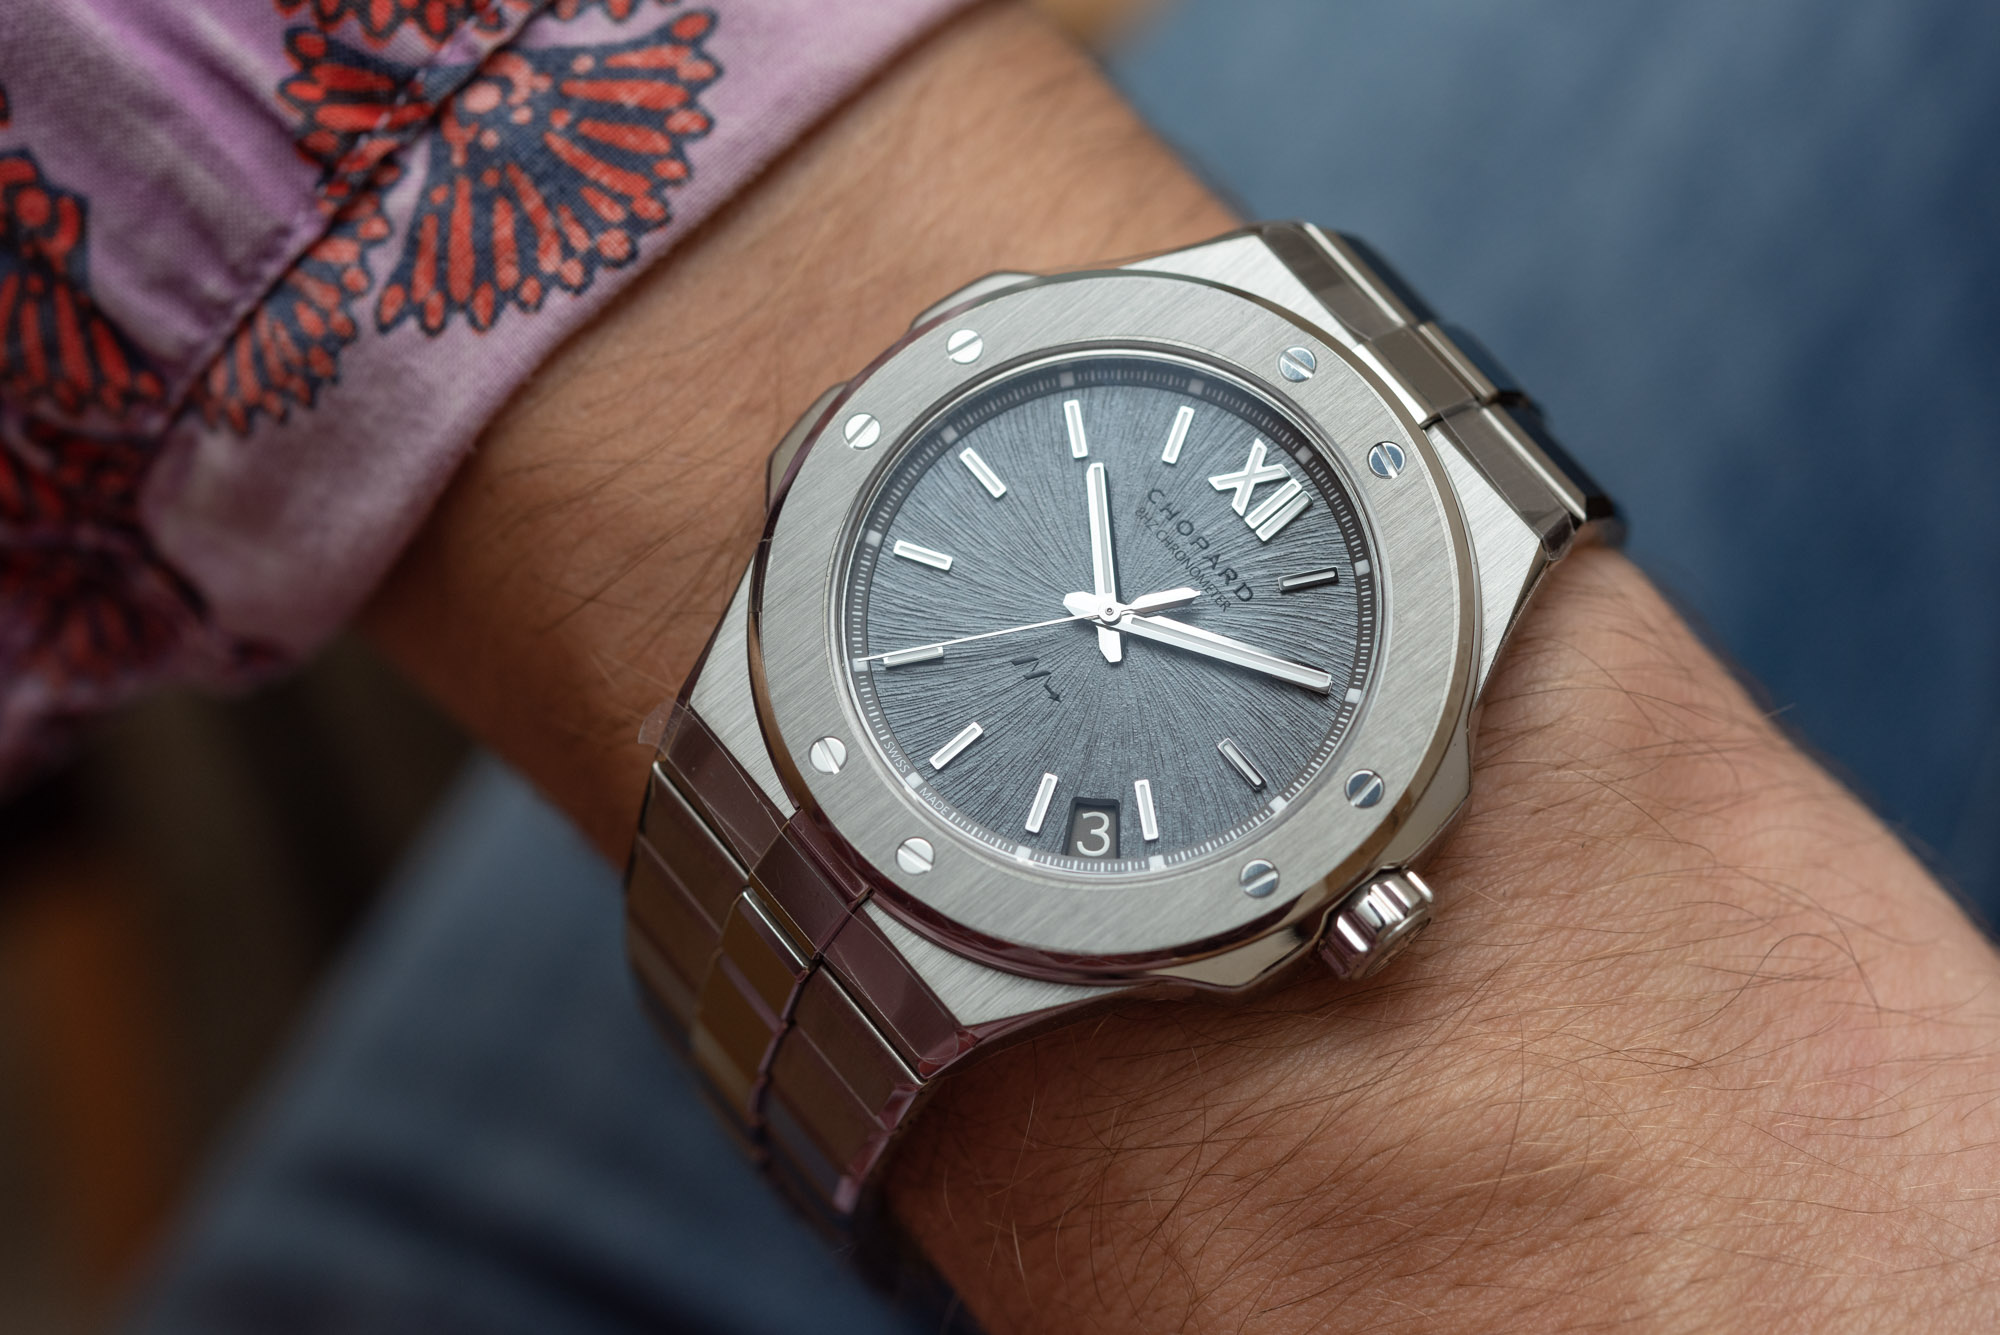 Chopard Alpine Eagle Cadence 8HF – Element iN Time NYC